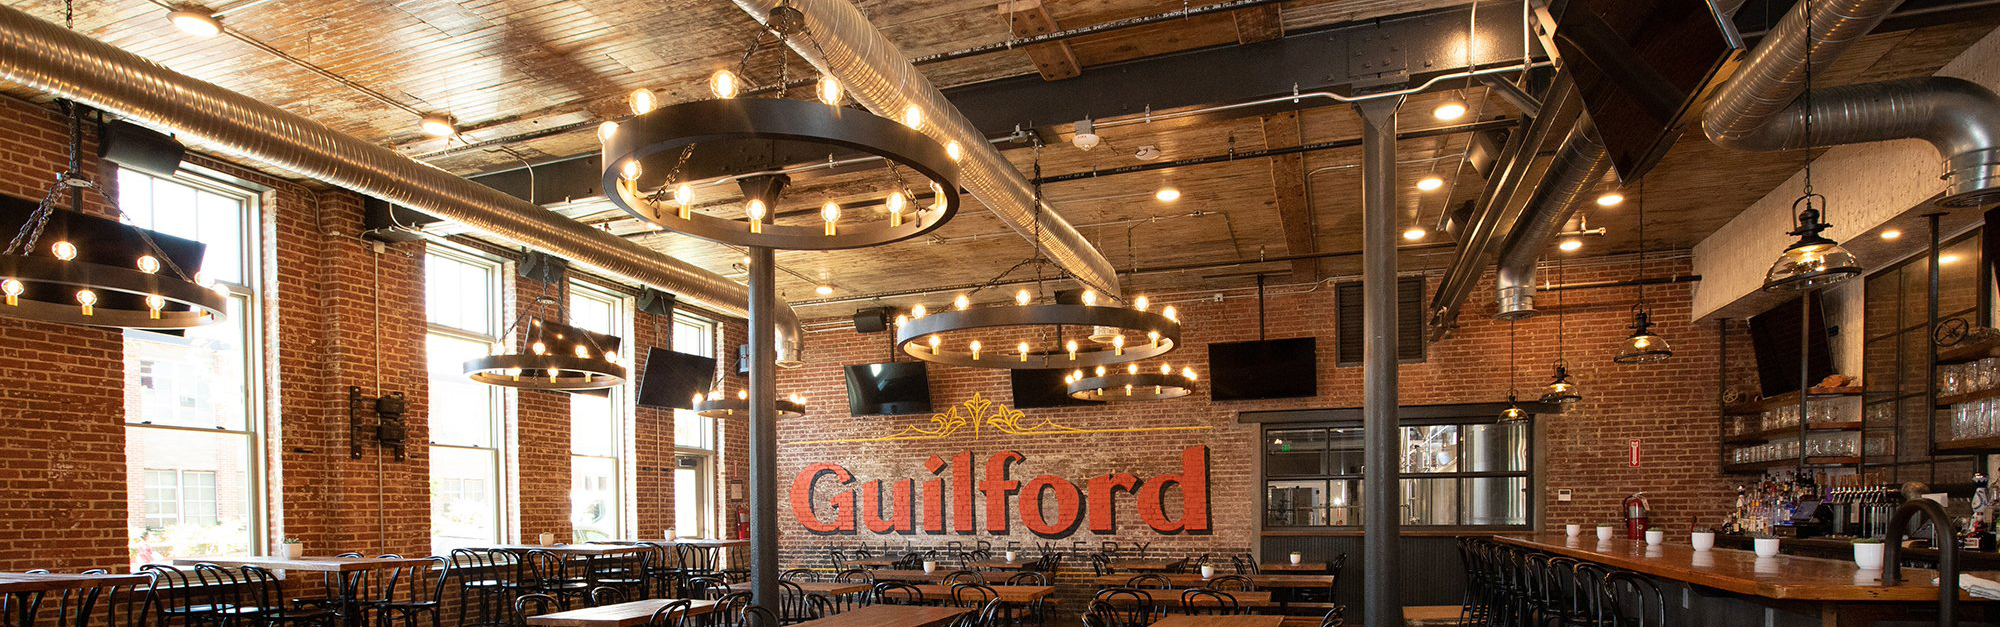 Guilford Hall Brewery Lighting